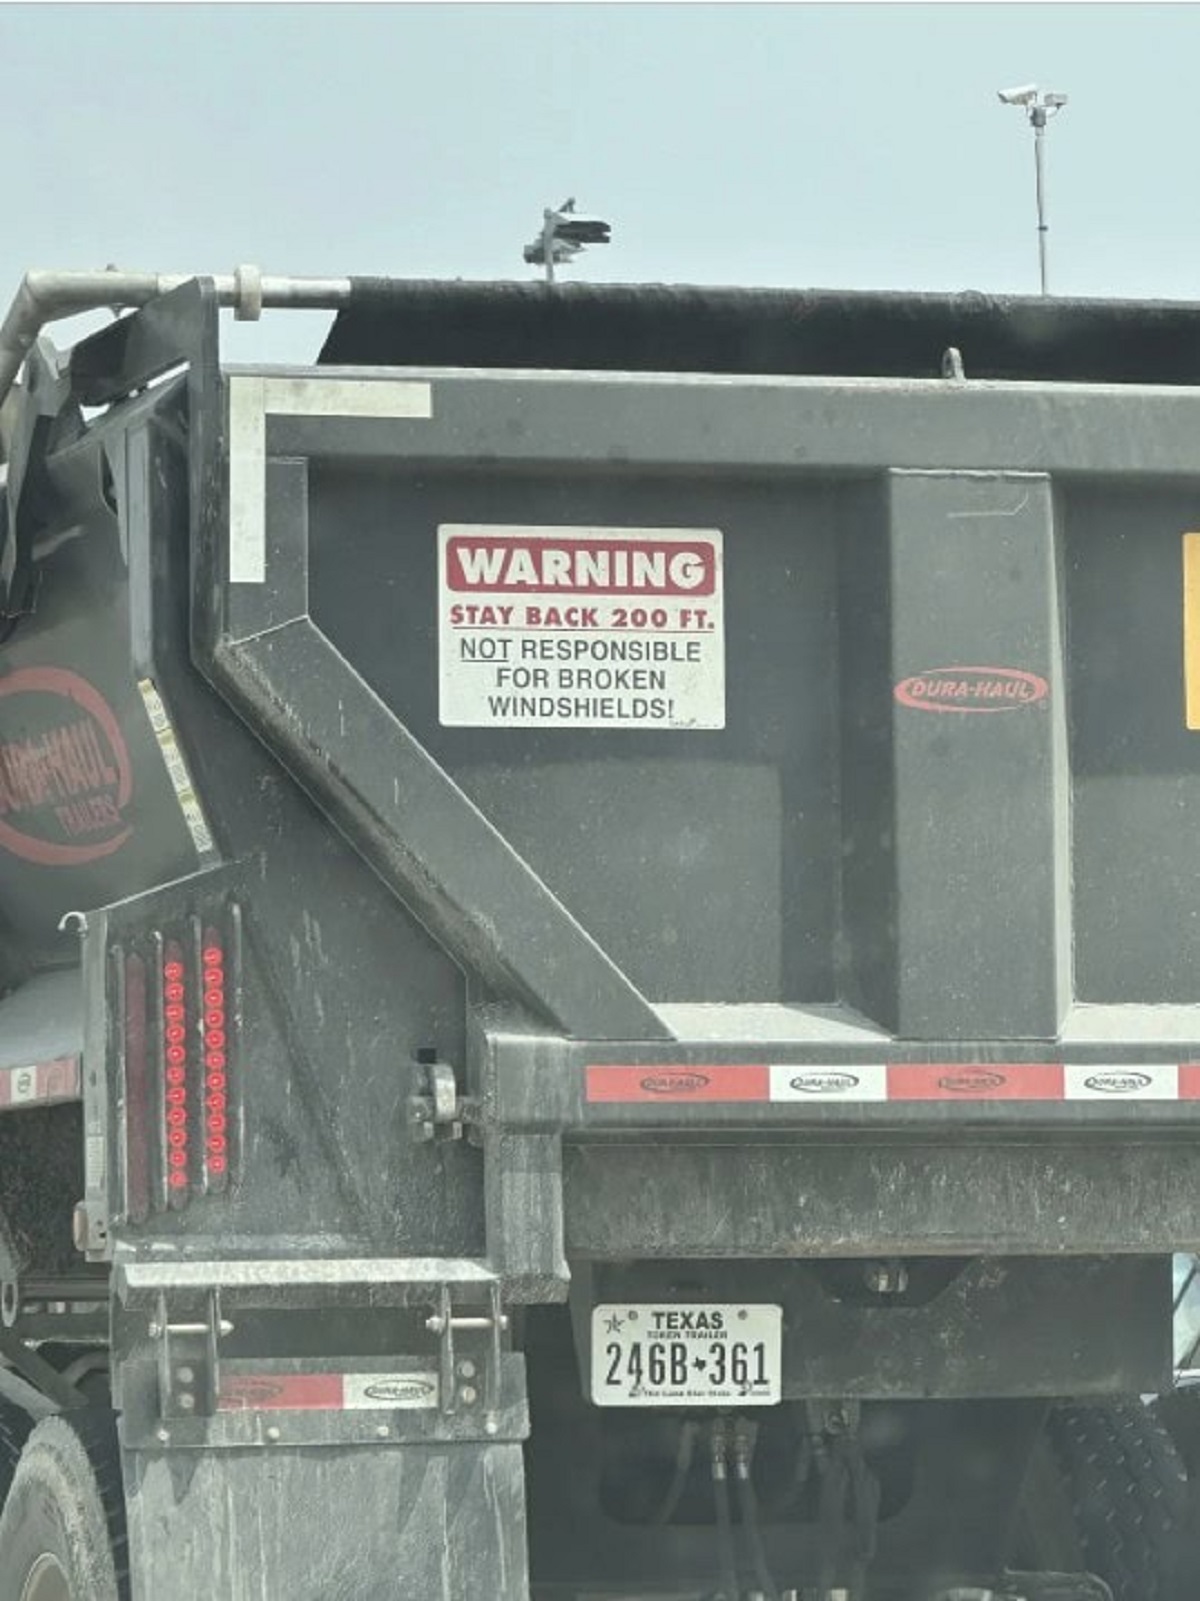 Semi trucks with this message on the back.